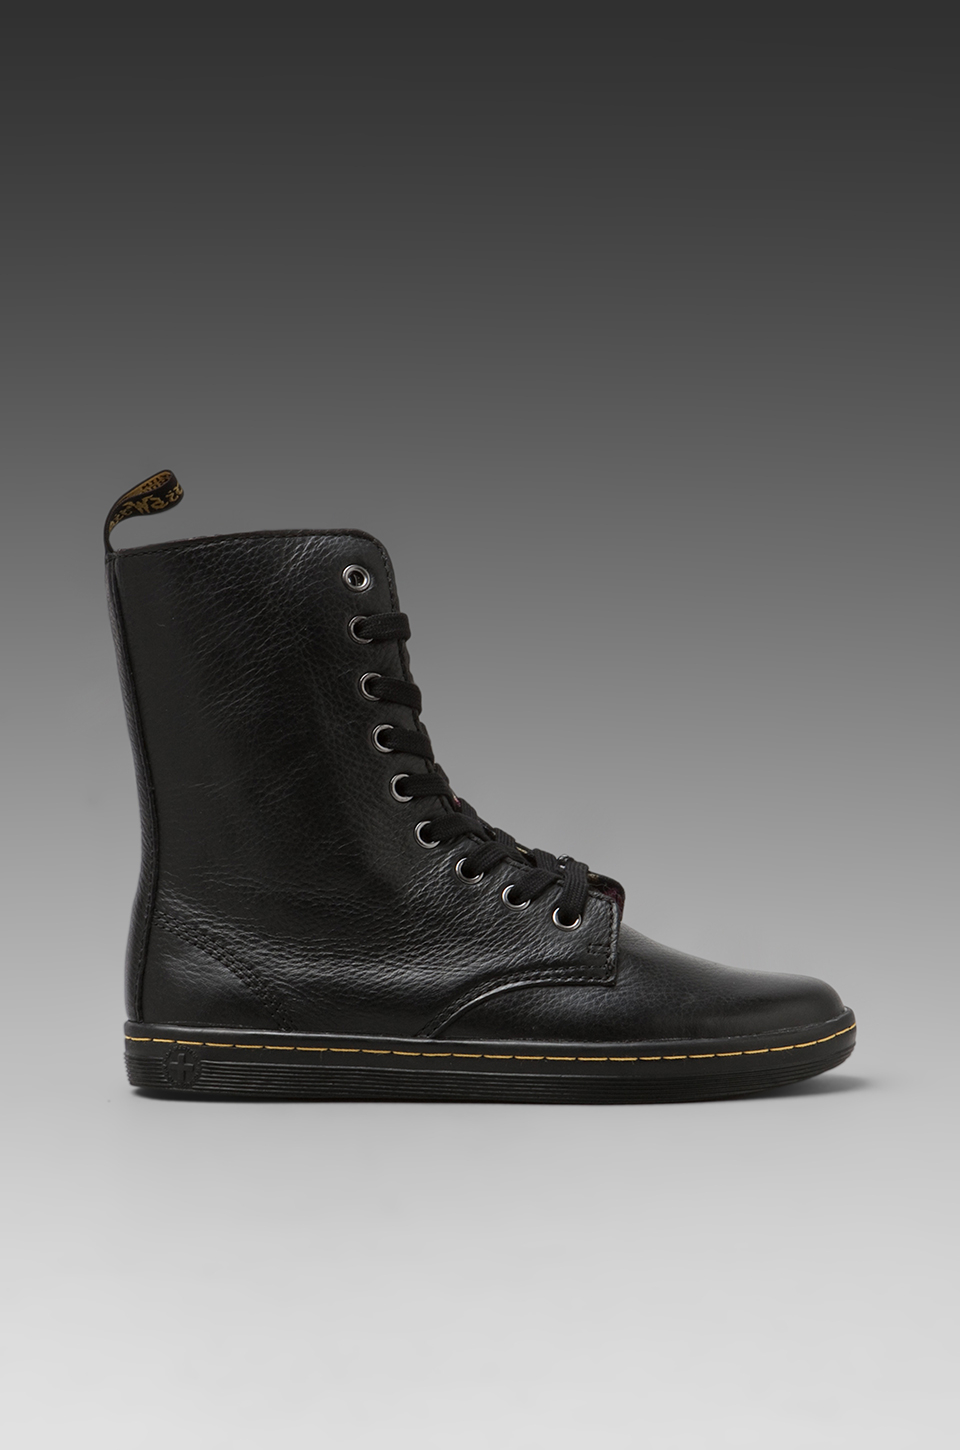 westfield stratford doc martens Today's Deals- OFF-51% >Free Delivery